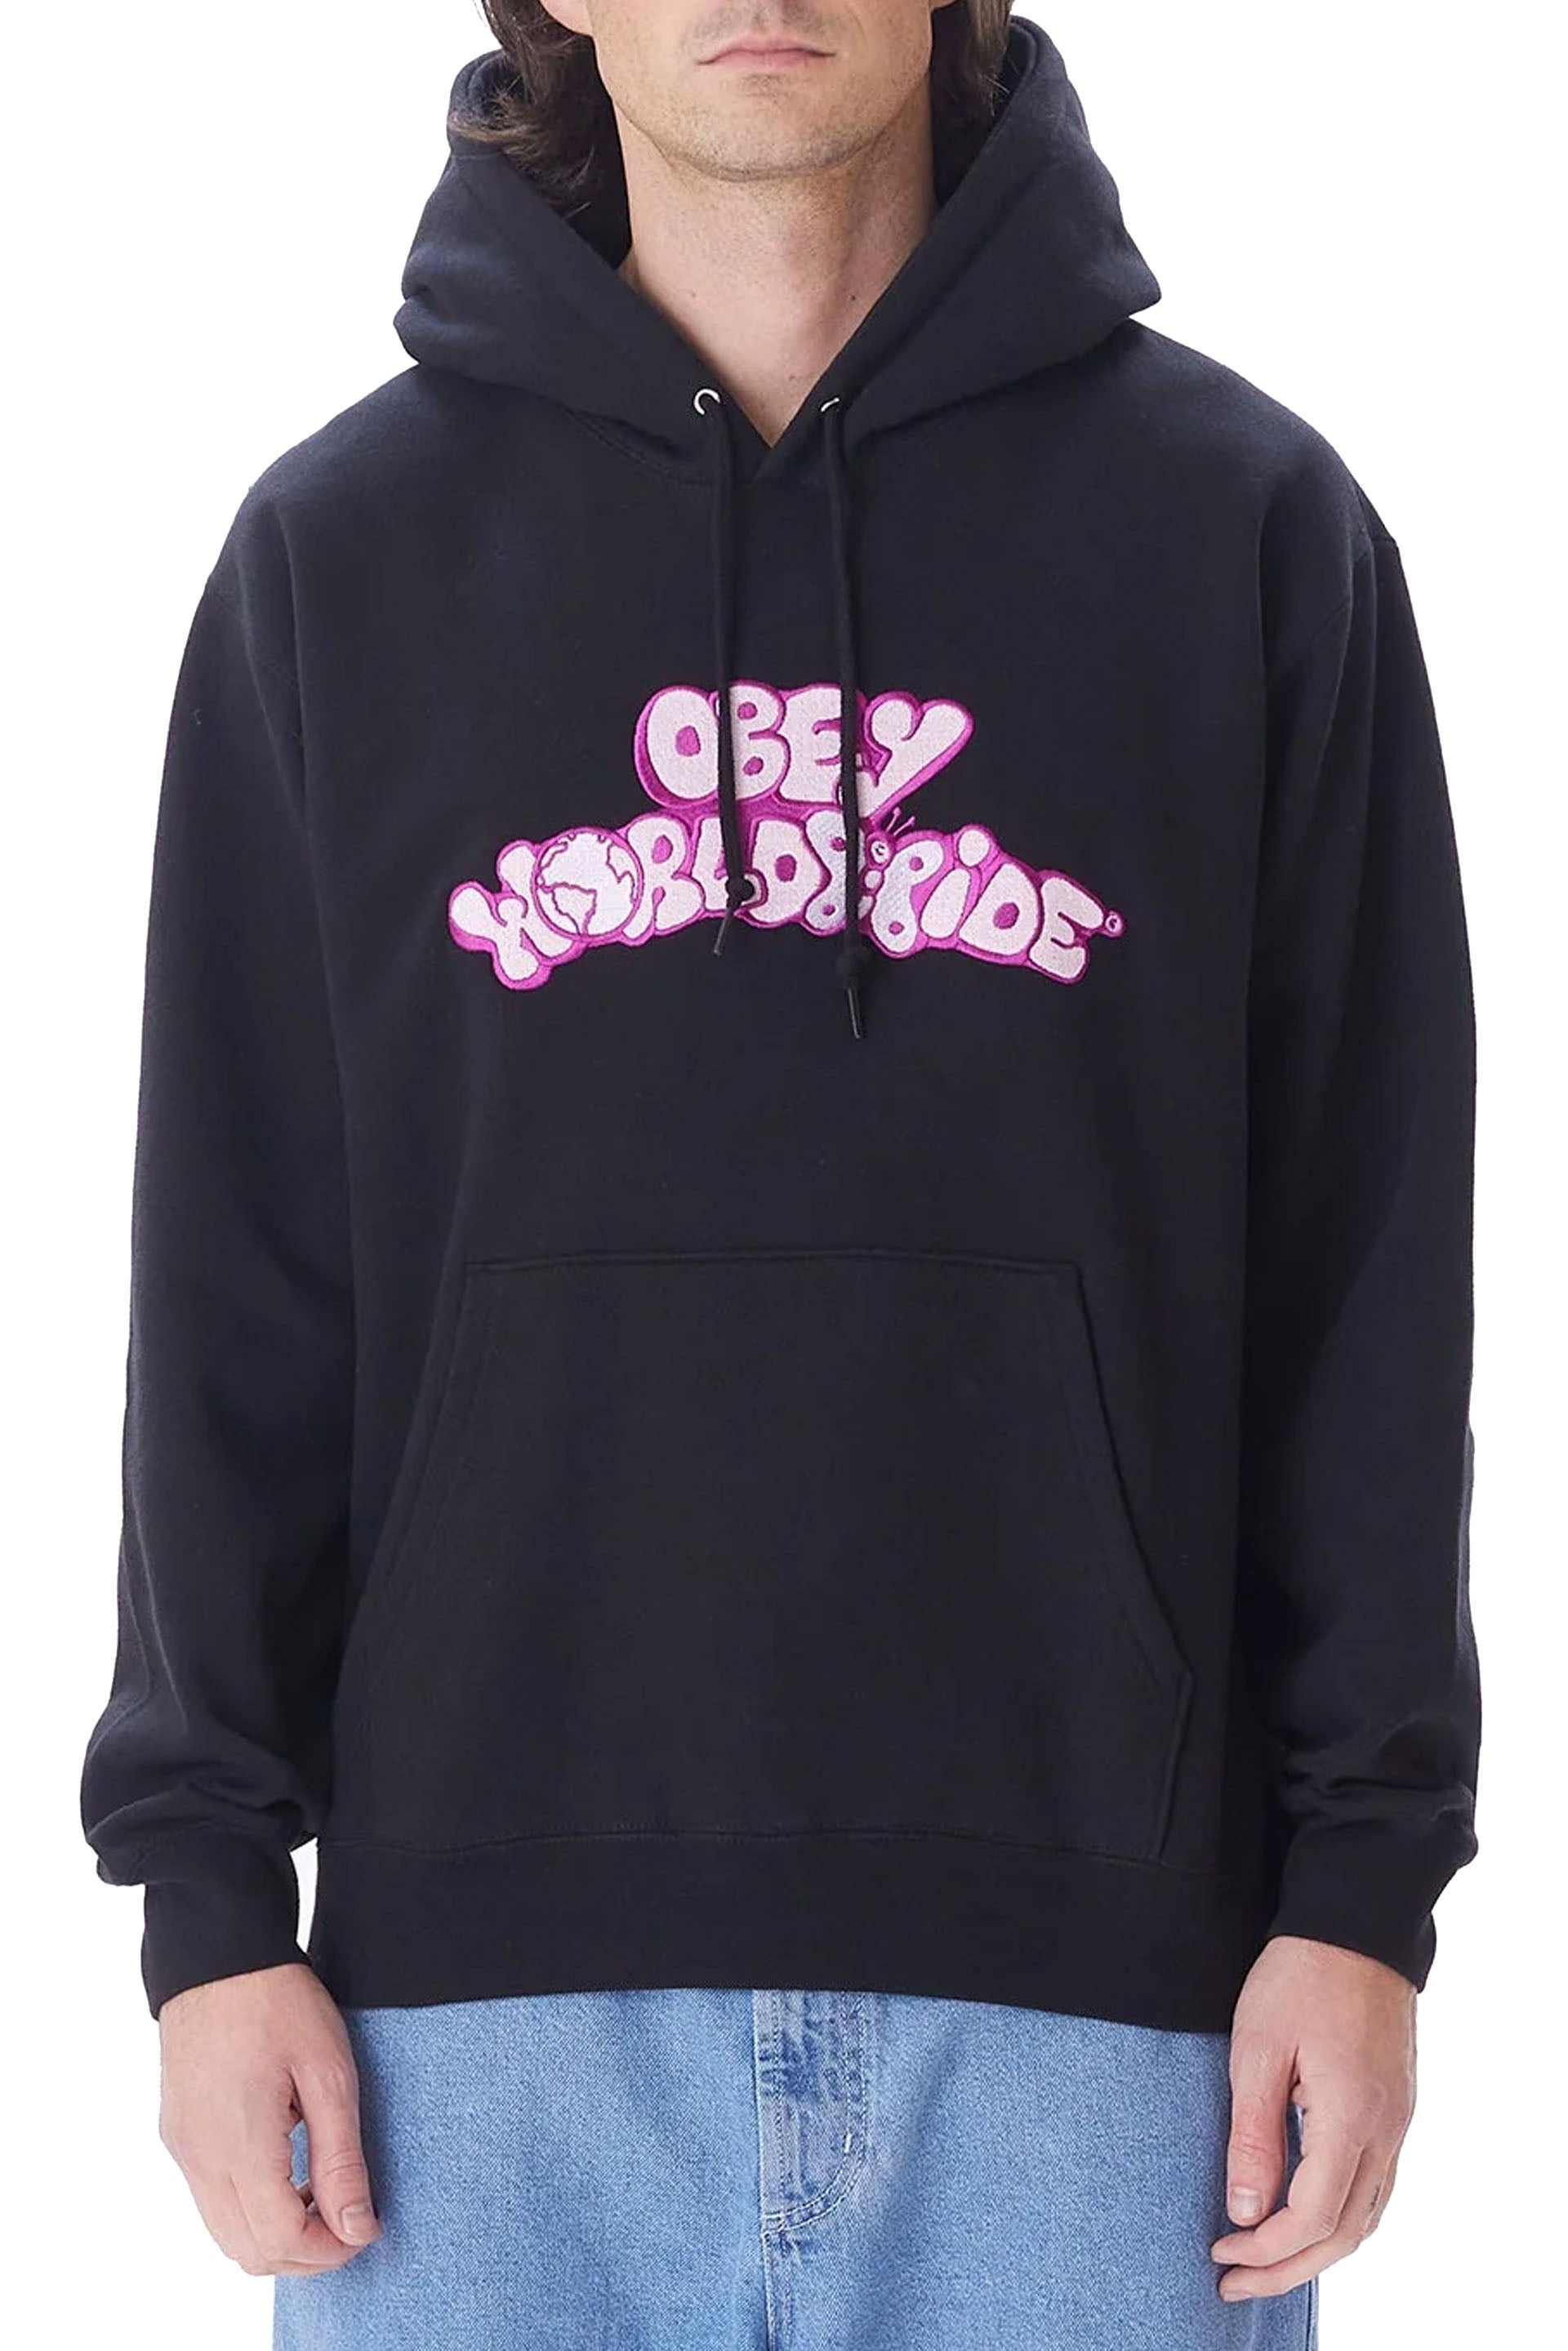 Obey Year Pullover Hood Nero